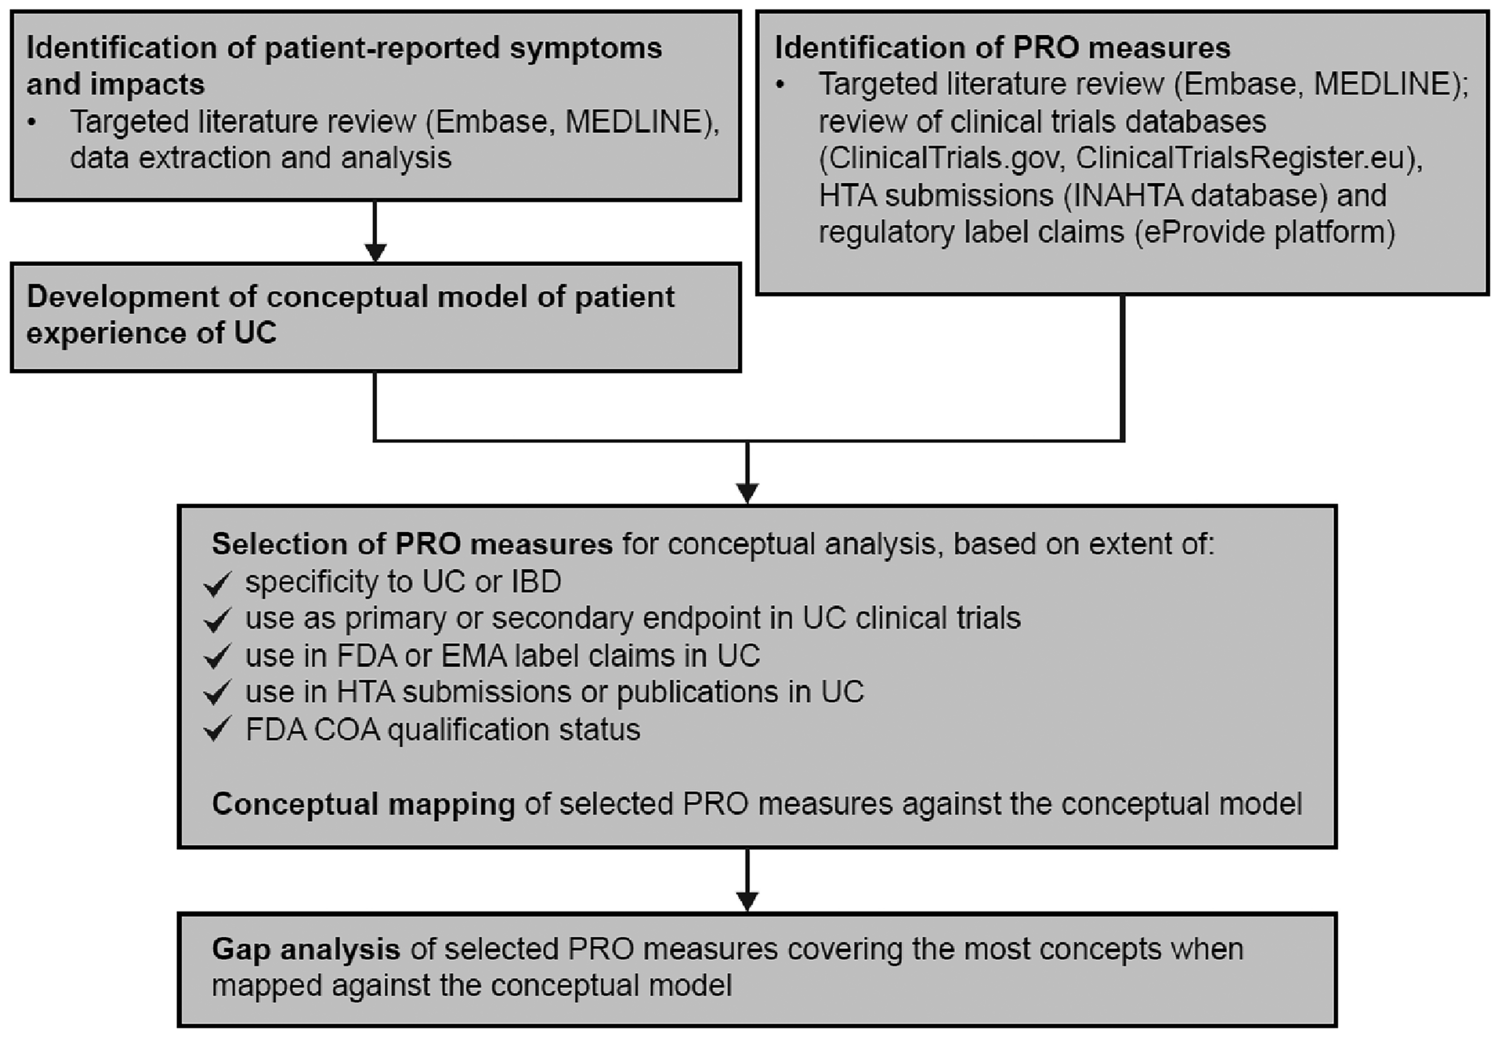 Patient experiences in ulcerative colitis: conceptual model and review of patient-reported outcome measures